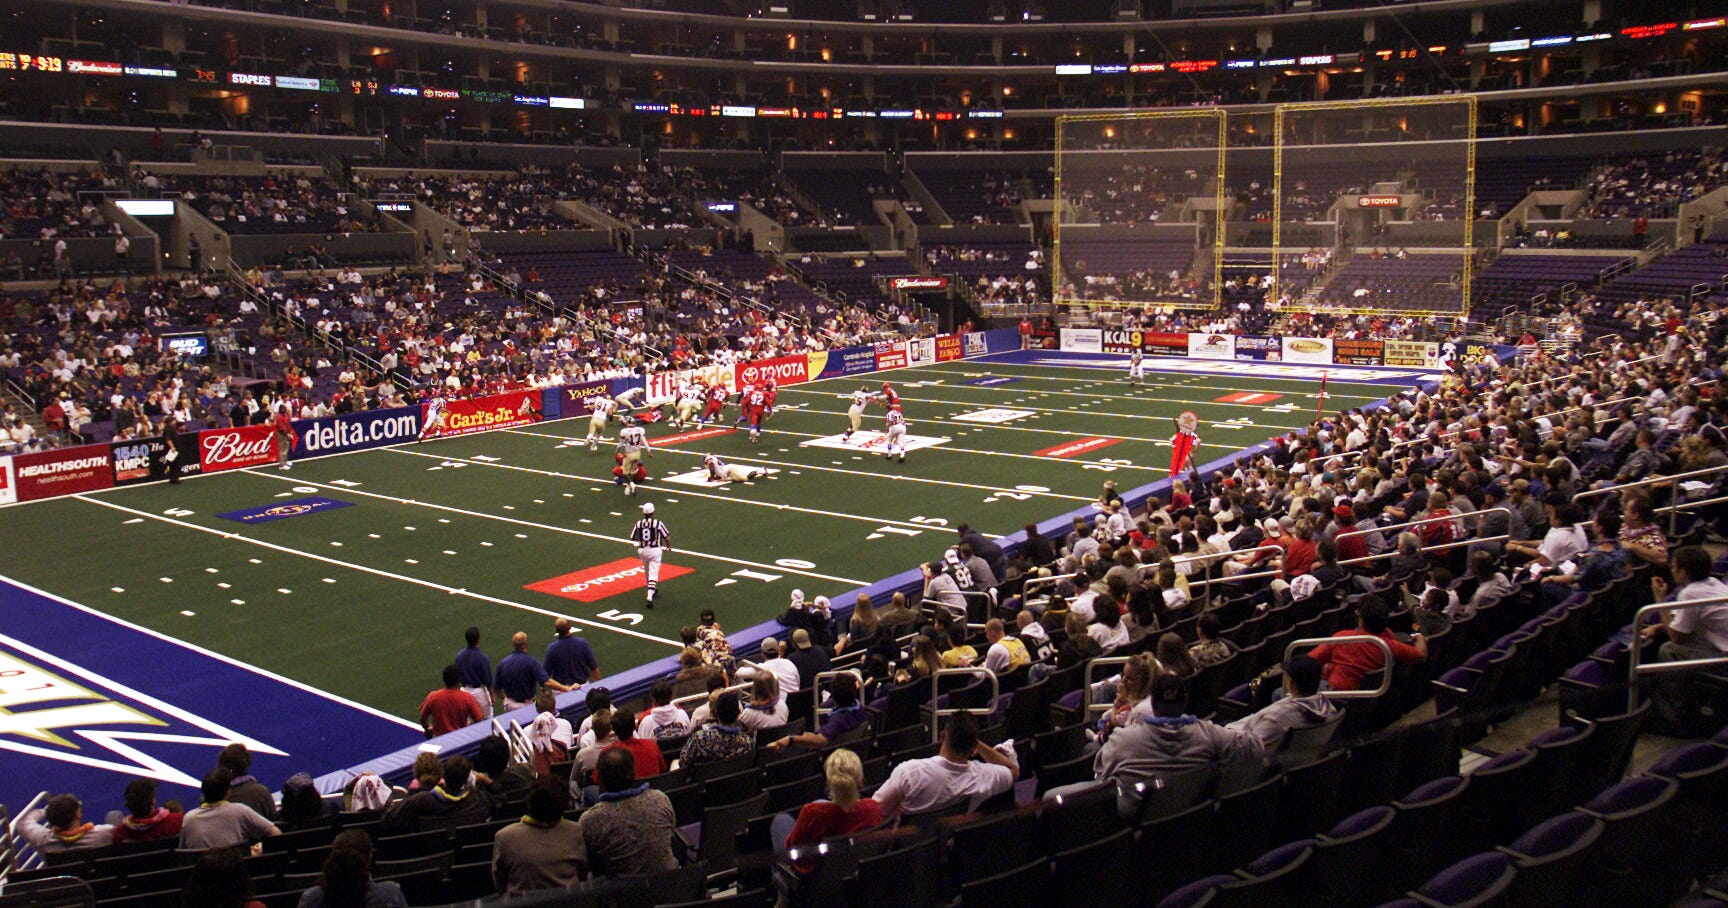 American football league coming to China